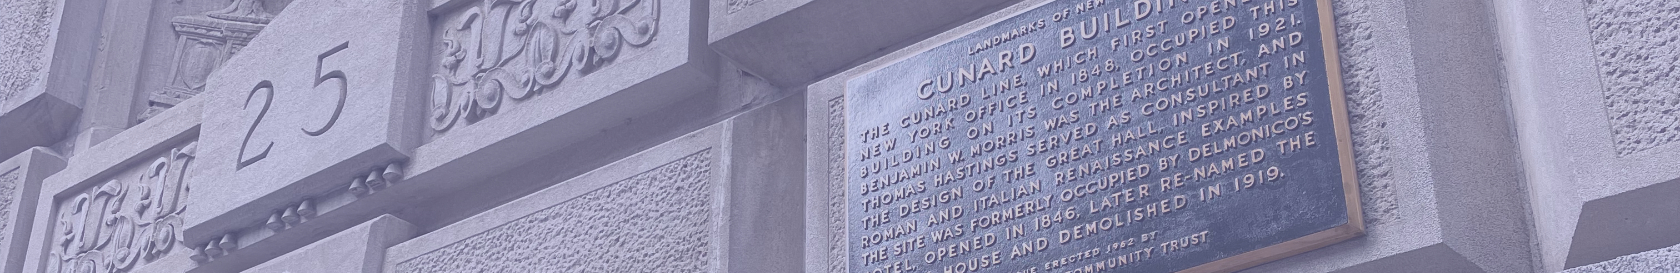 CWE History - Cunard Building image